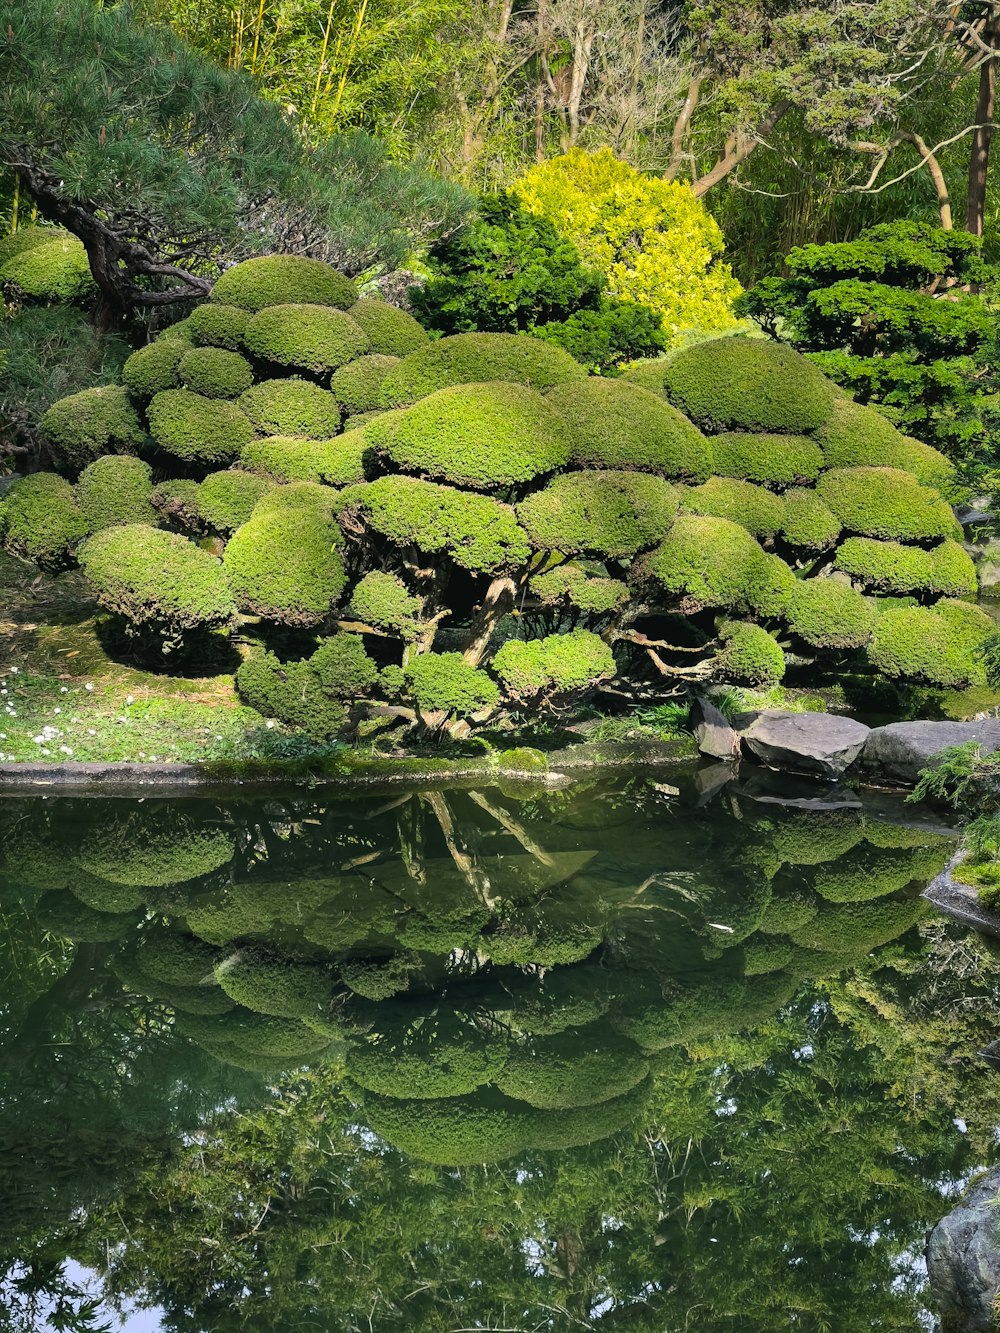 a pond surrounded by a lush green forest